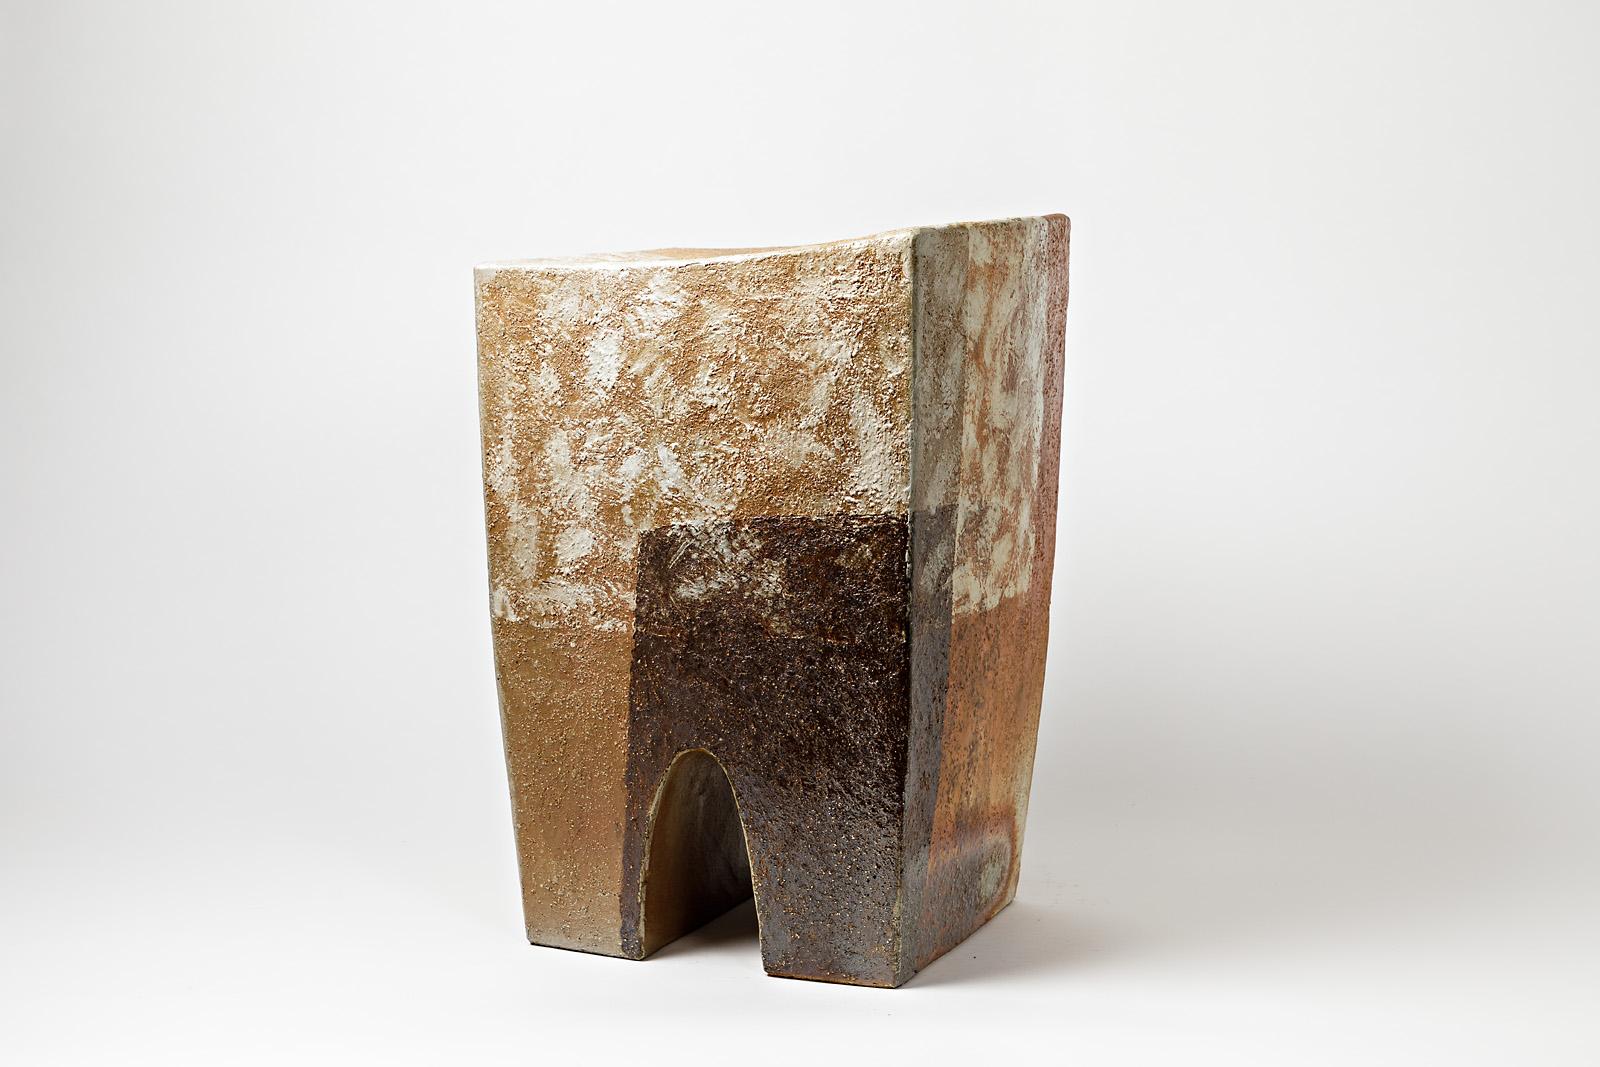 French Ceramic Stool by Martin Goerg, circa 2018 For Sale